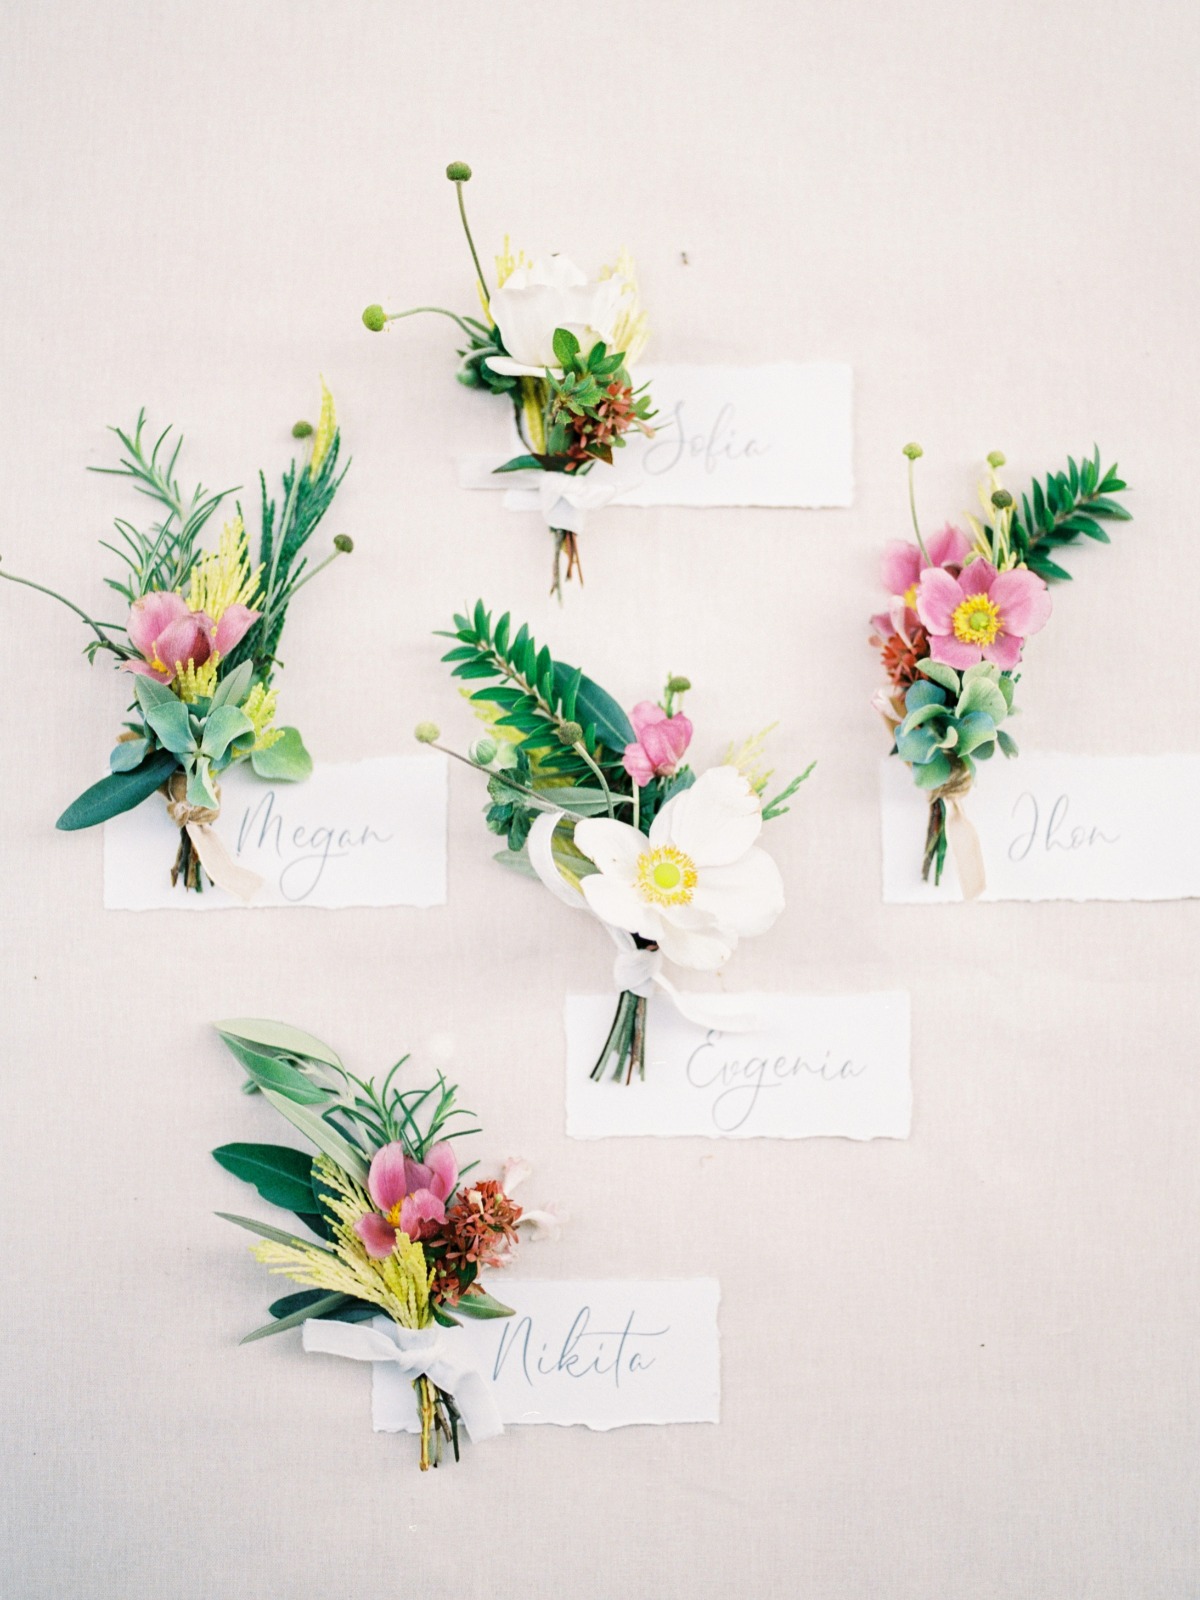 mini bouquets used for escort cards